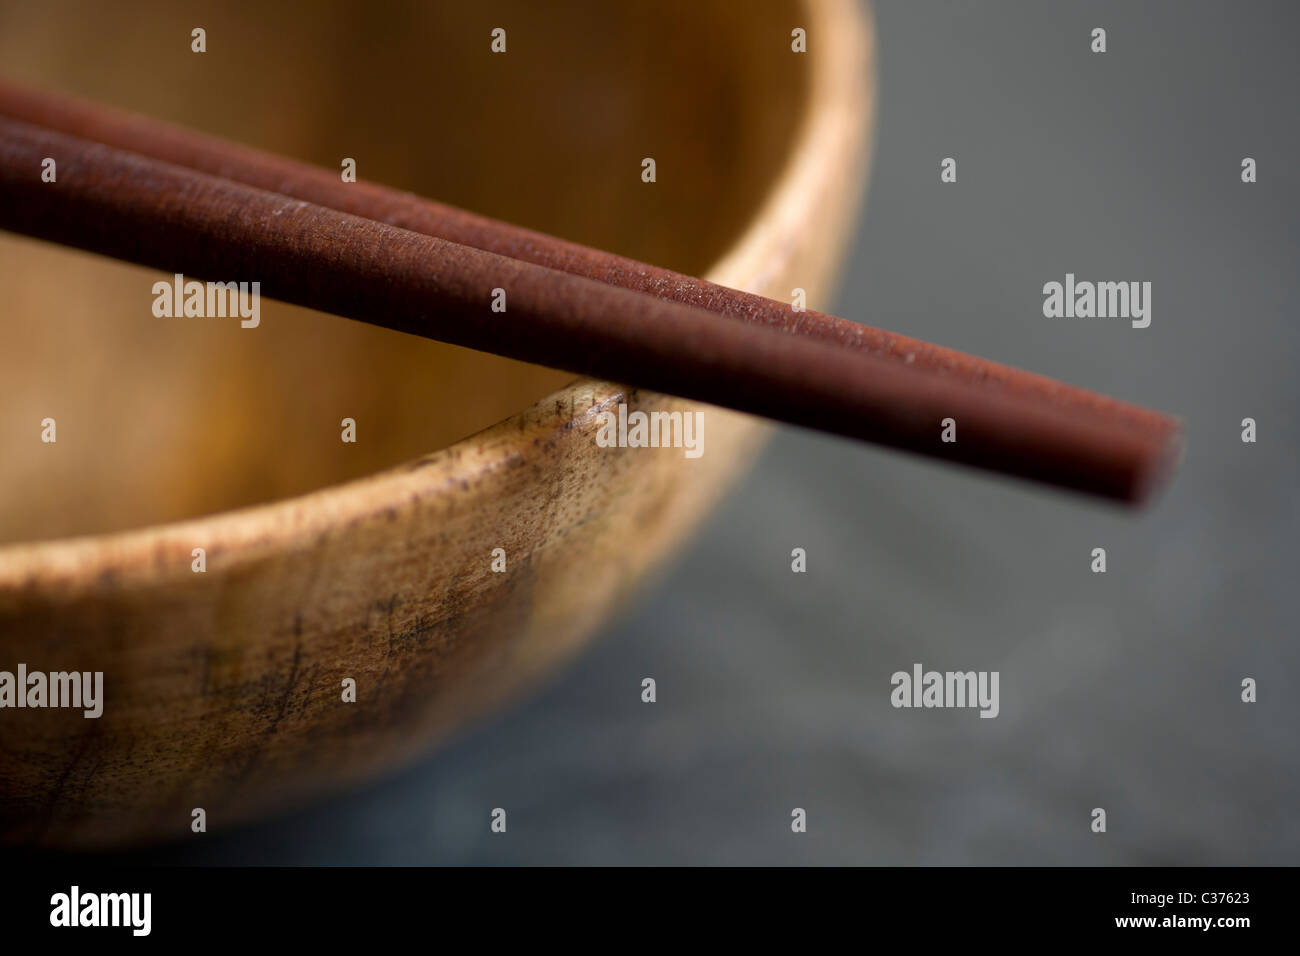 Wooden chopsticks and bowl Stock Photo